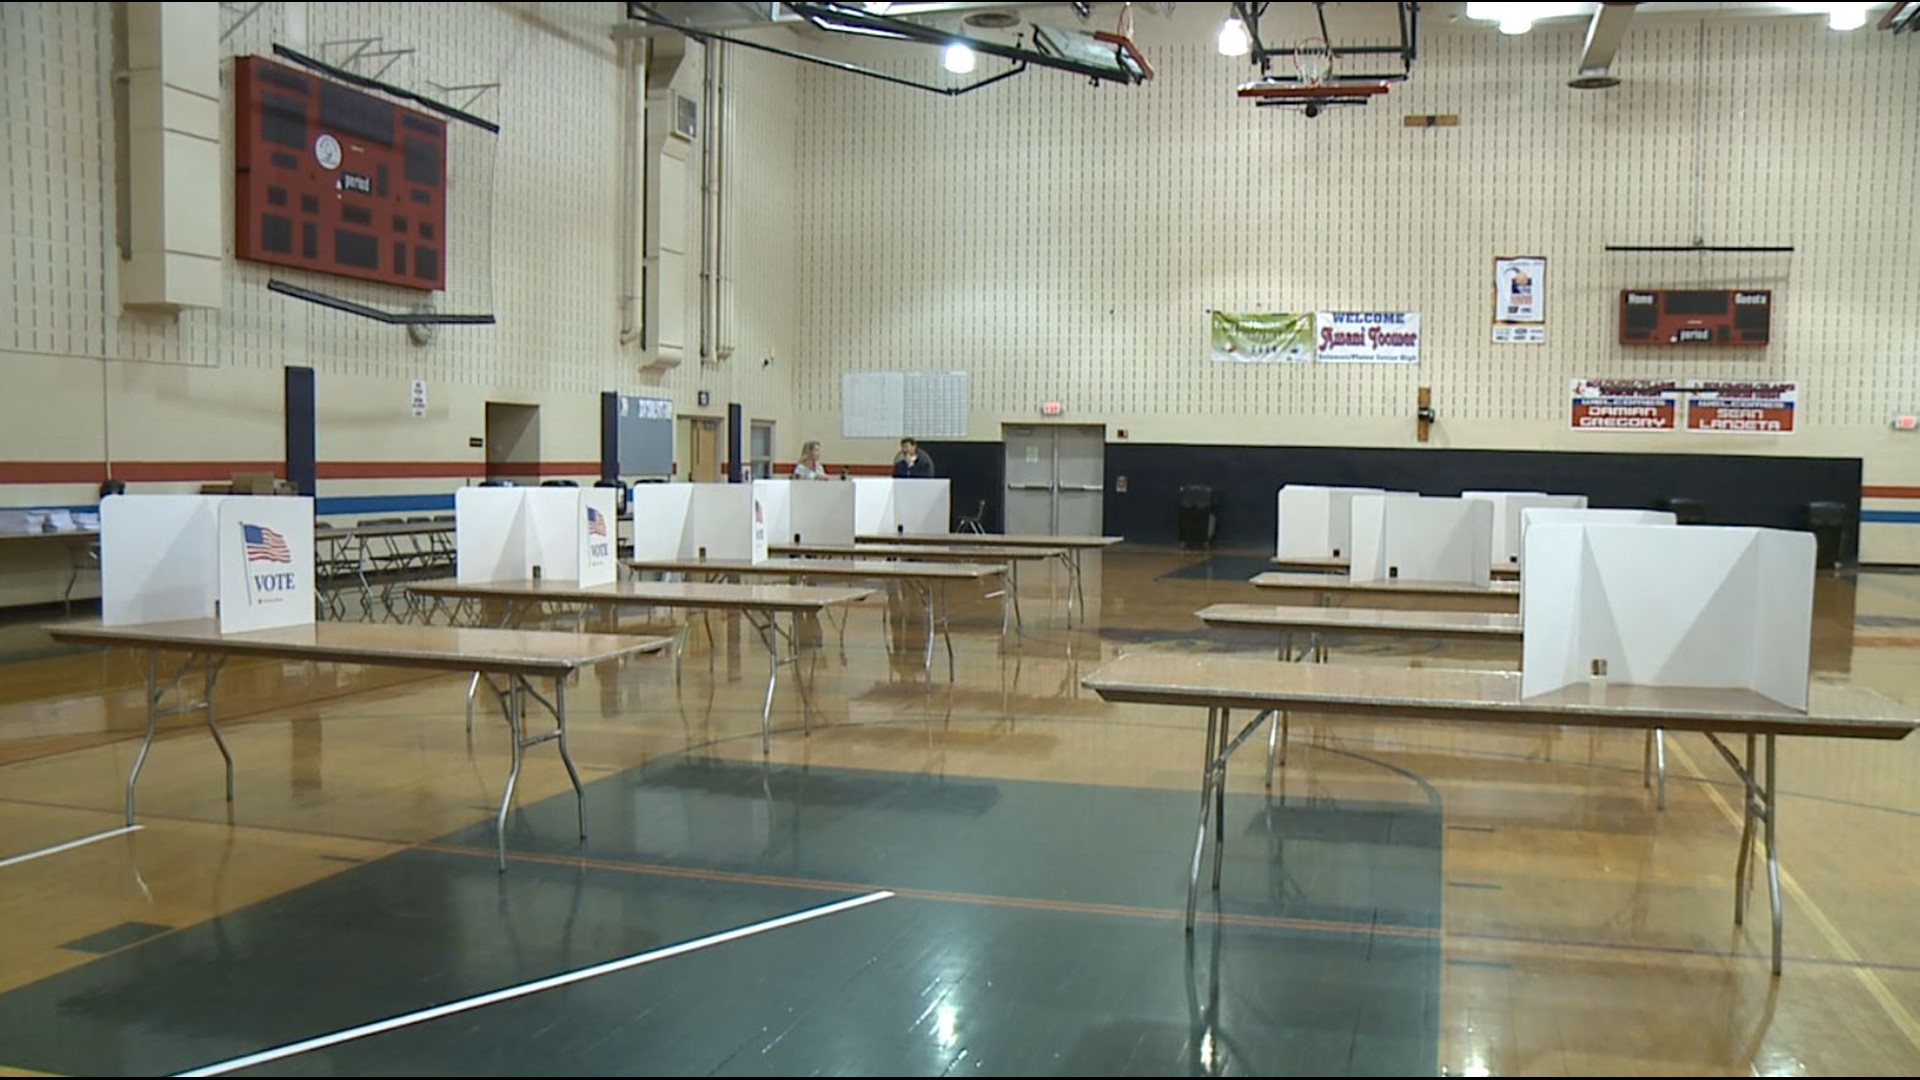 This will be a much different primary day election in Luzerne County.